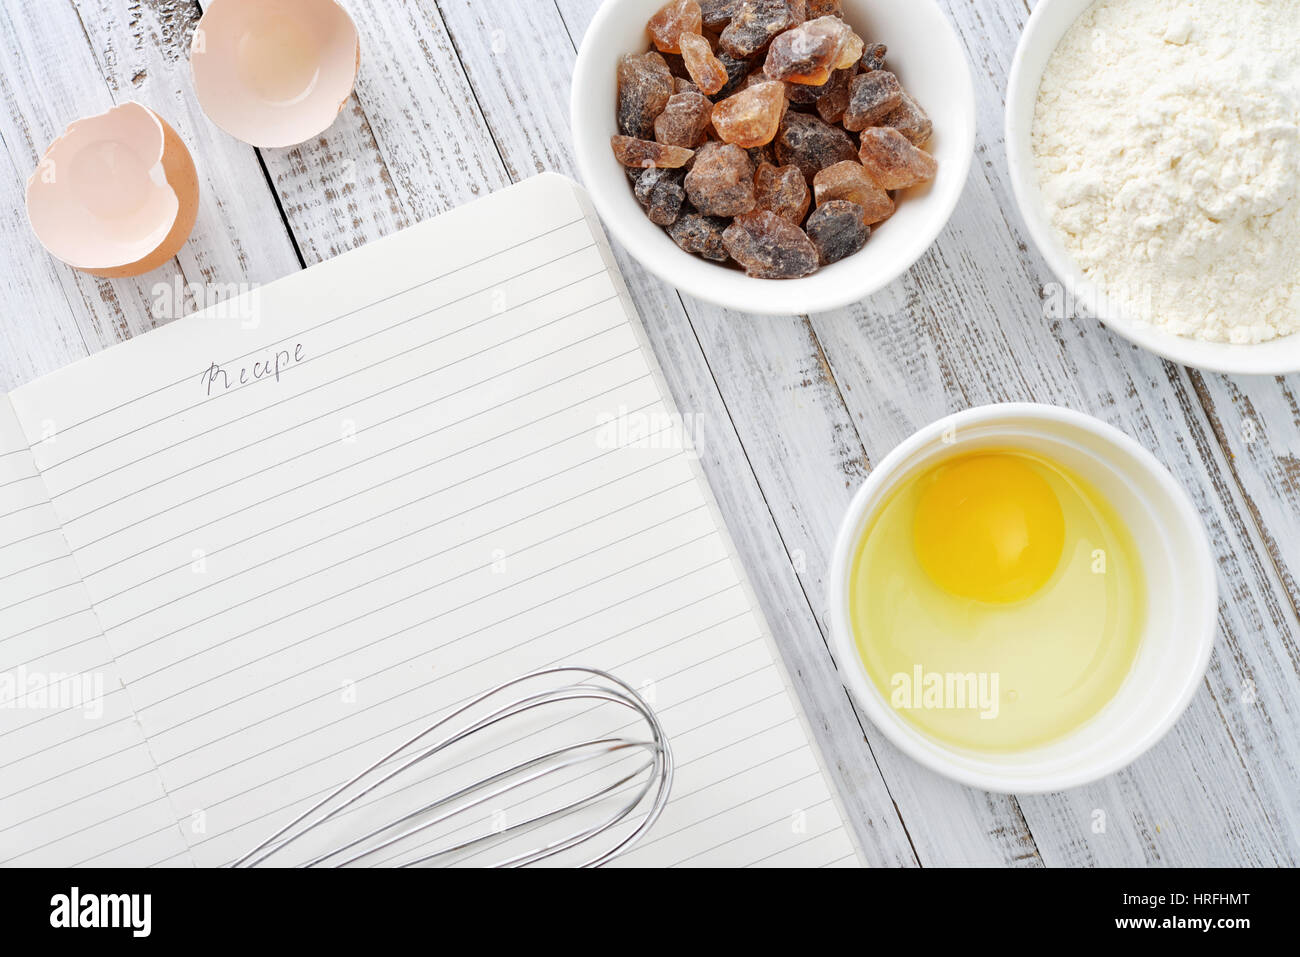 Note book and ingredients for baking on a wooden background Stock Photo